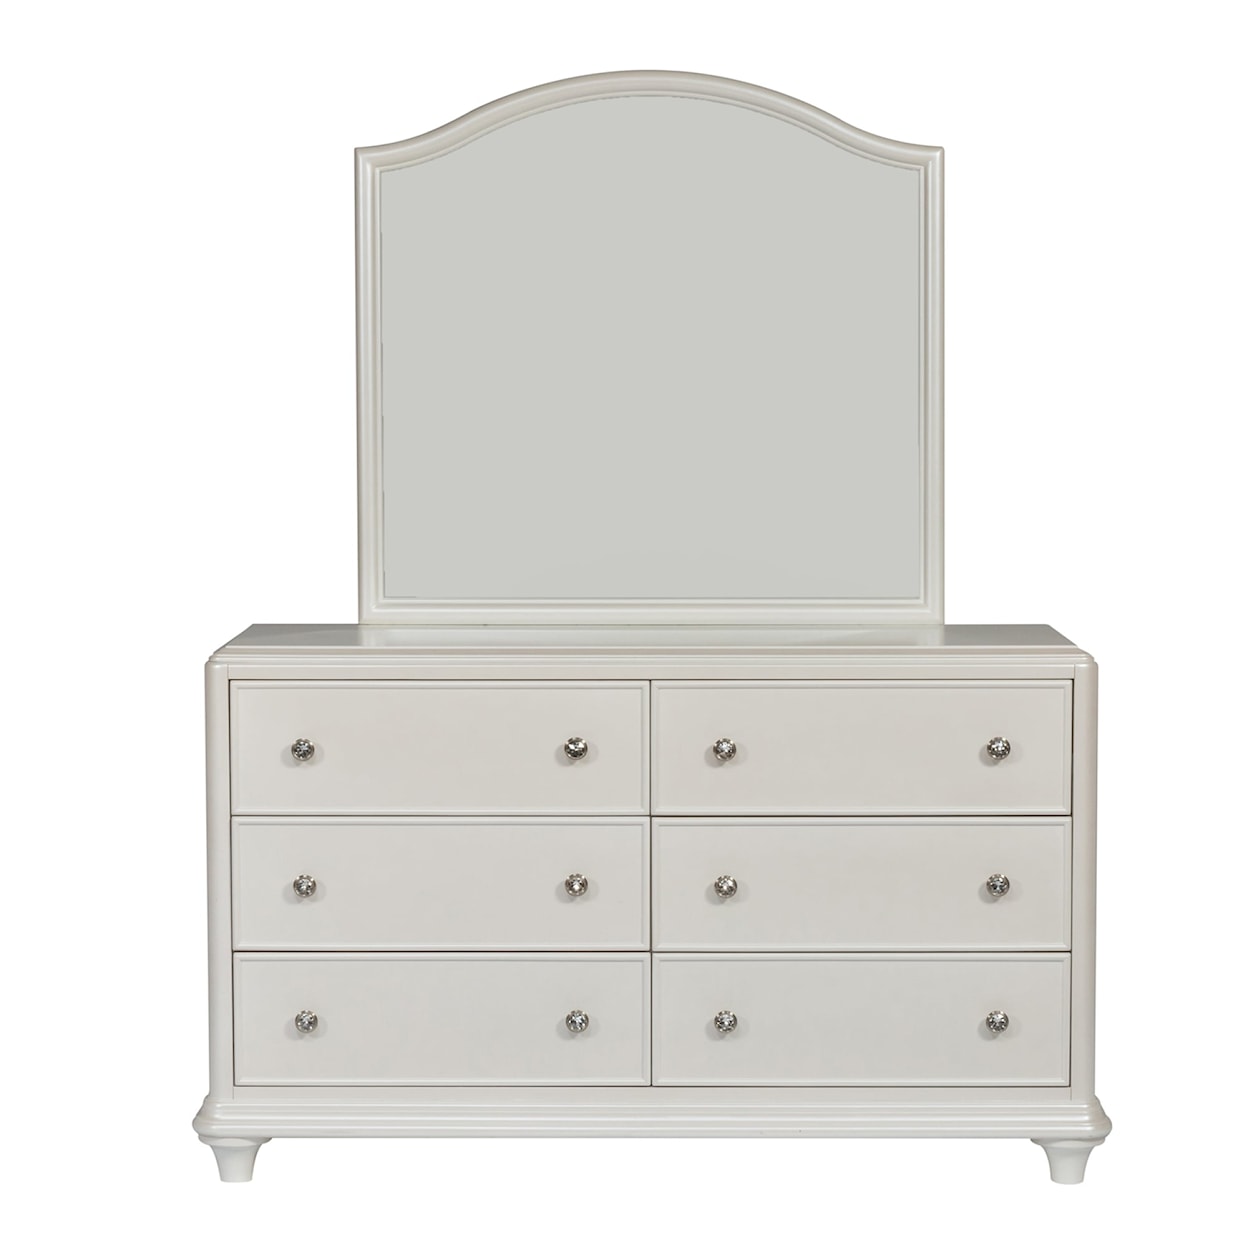 Liberty Furniture Stardust 6-Drawer Dresser with Arched Mirror